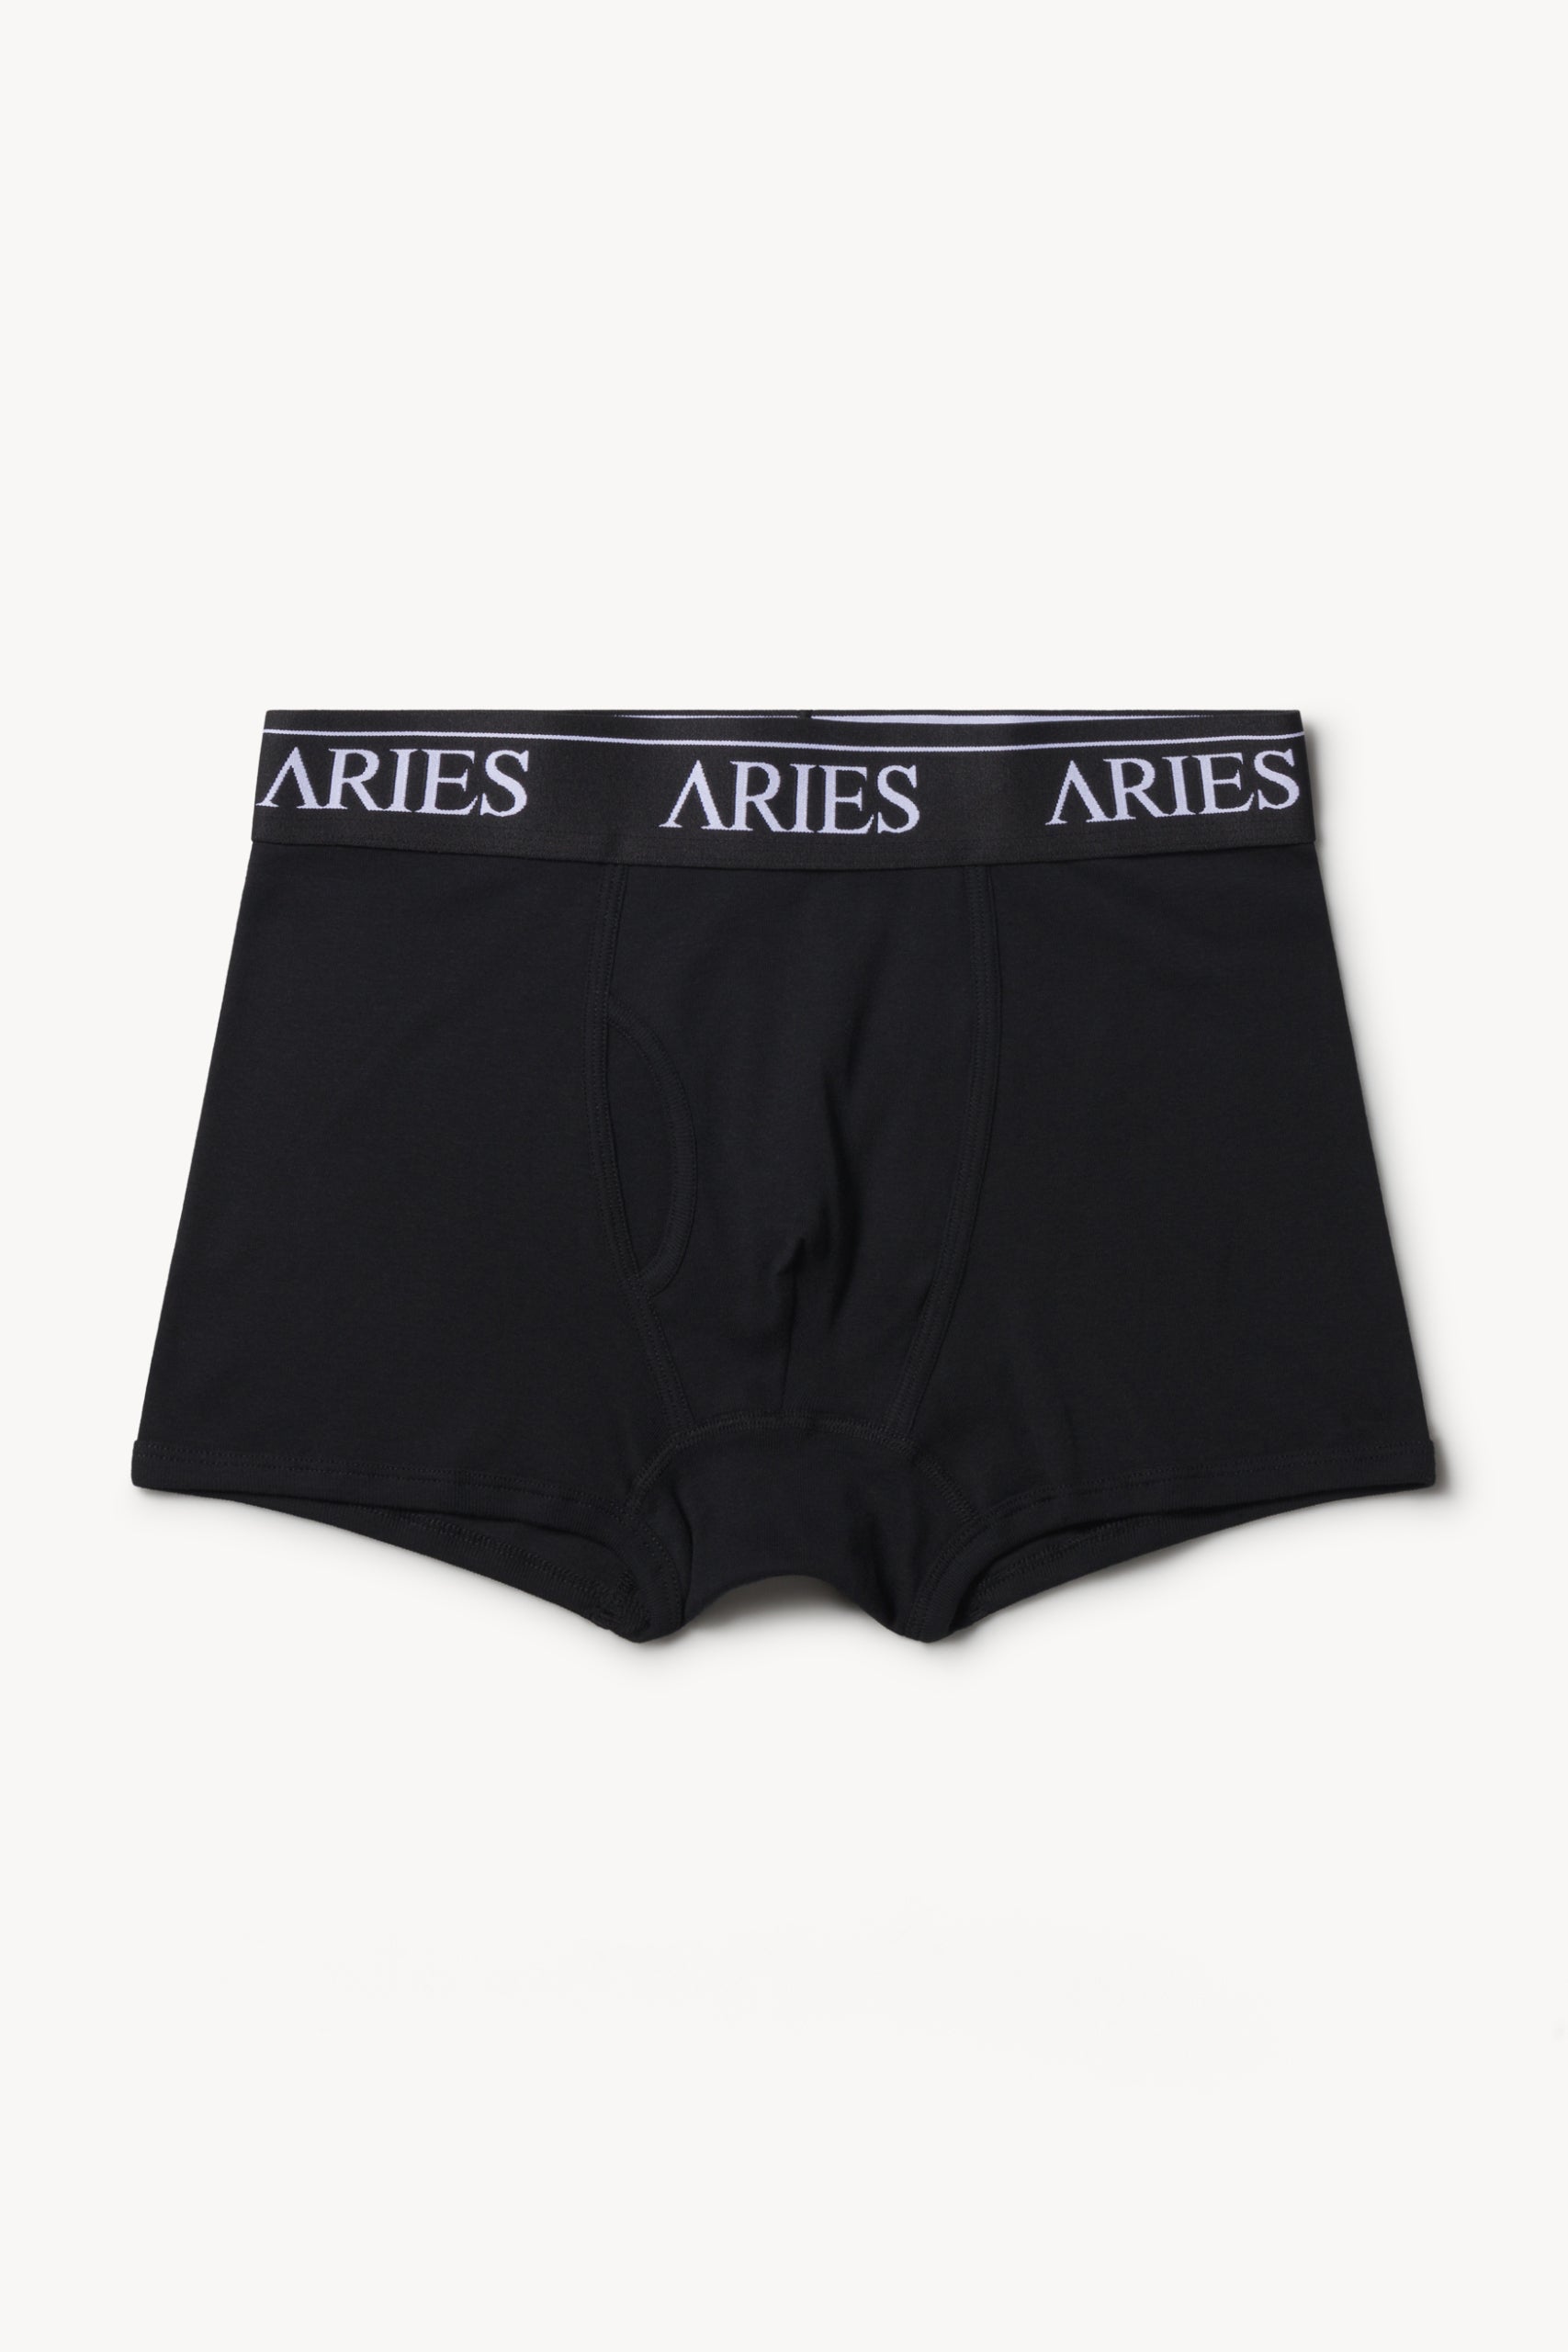 Jersey Boxer Briefs (Twin Pack) White & Black – Aries